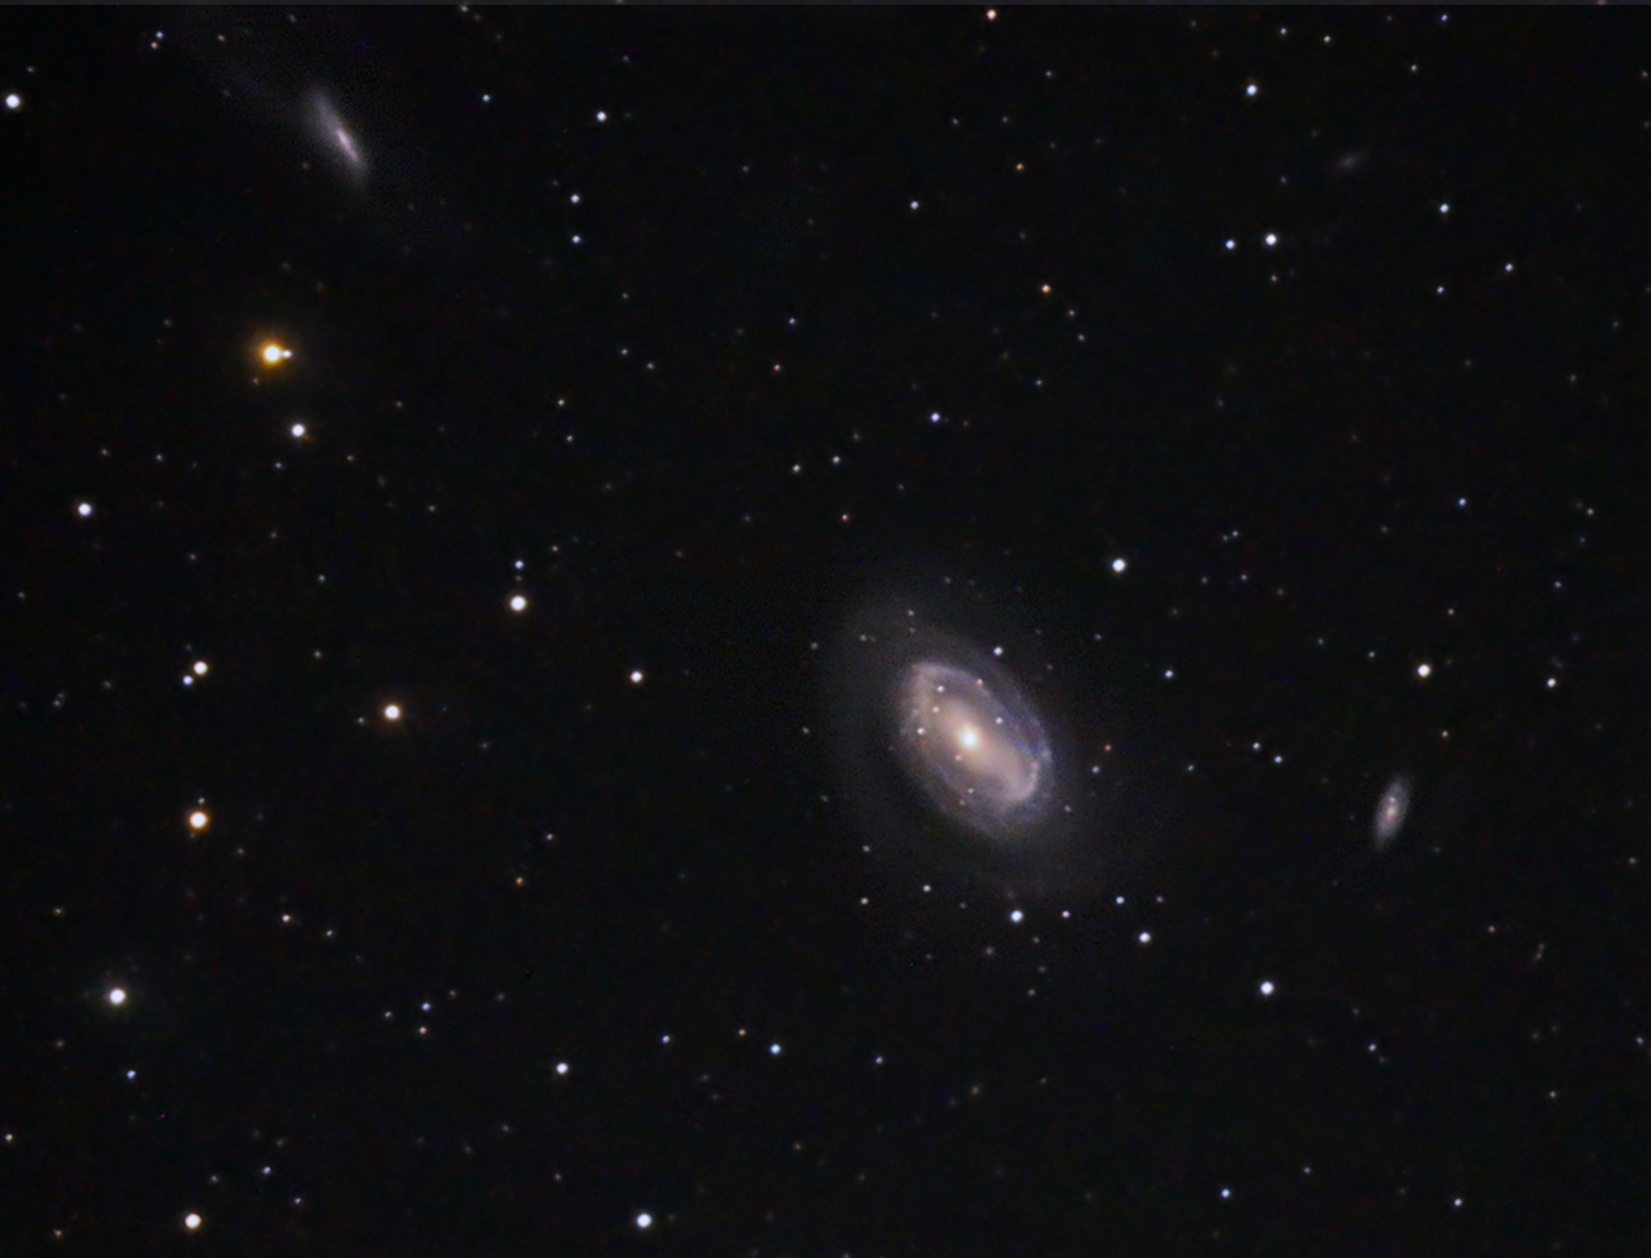 NGC 4725, NGC 4747 (Arp 159), NGC 4712  in Coma Berenices